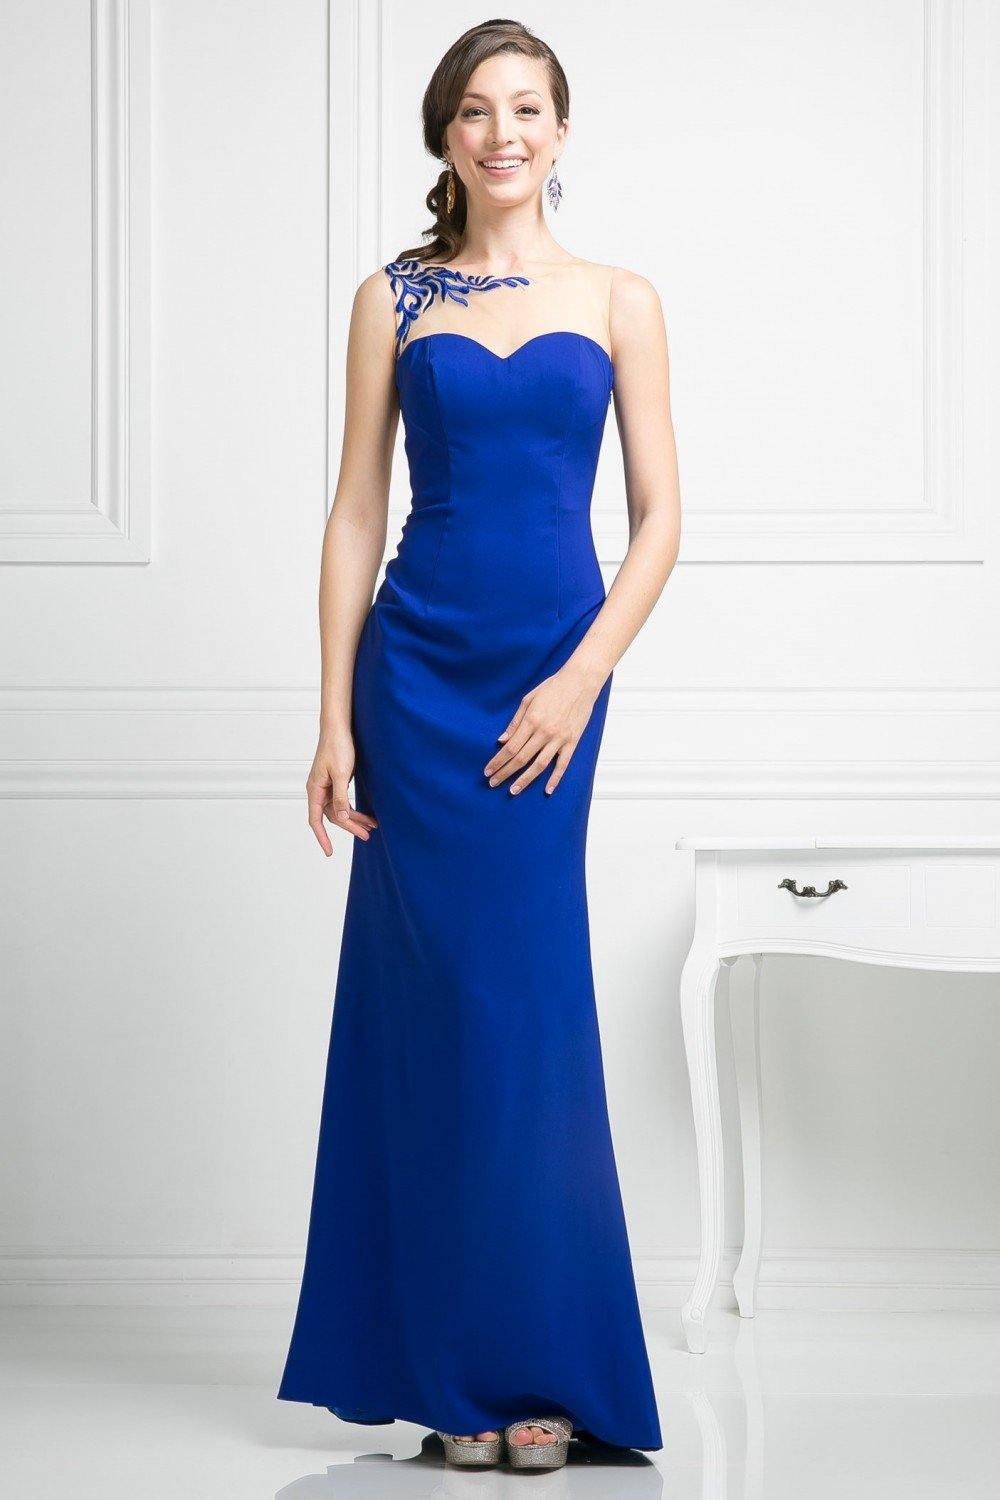 Formal Long Fitted Dress - The Dress Outlet